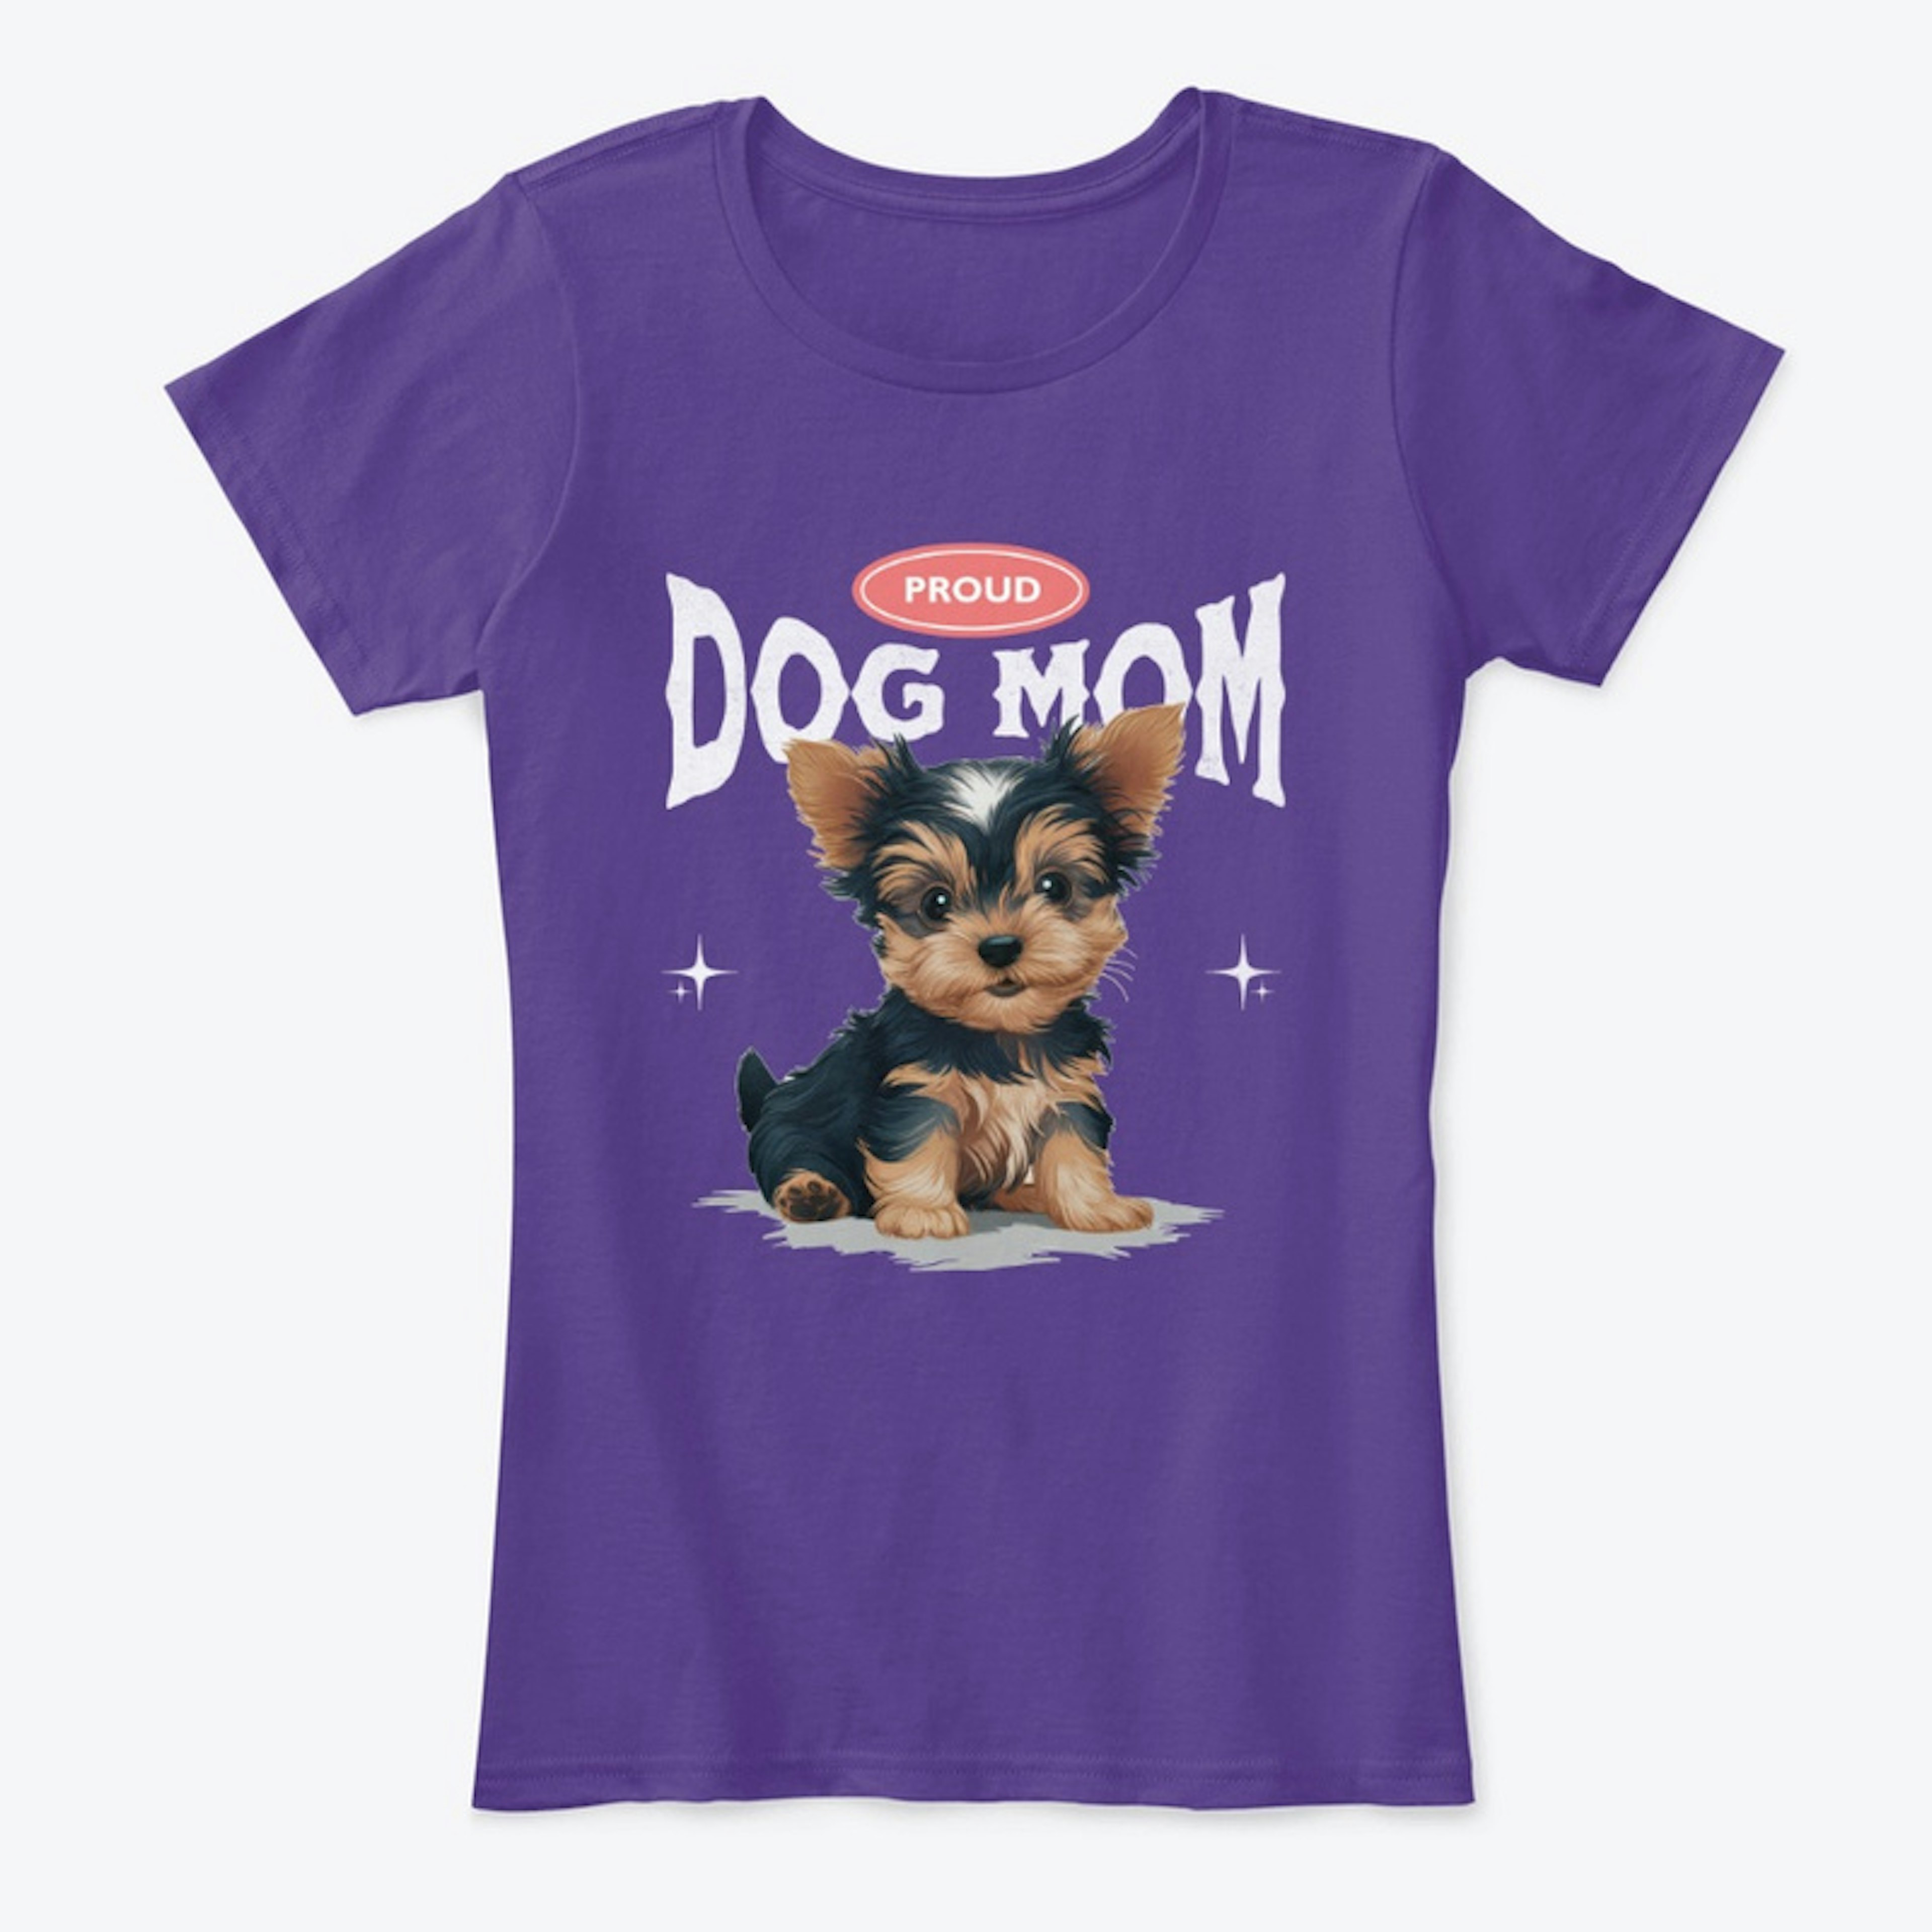 Proud Dog Mom (Yorkshire Terrier)